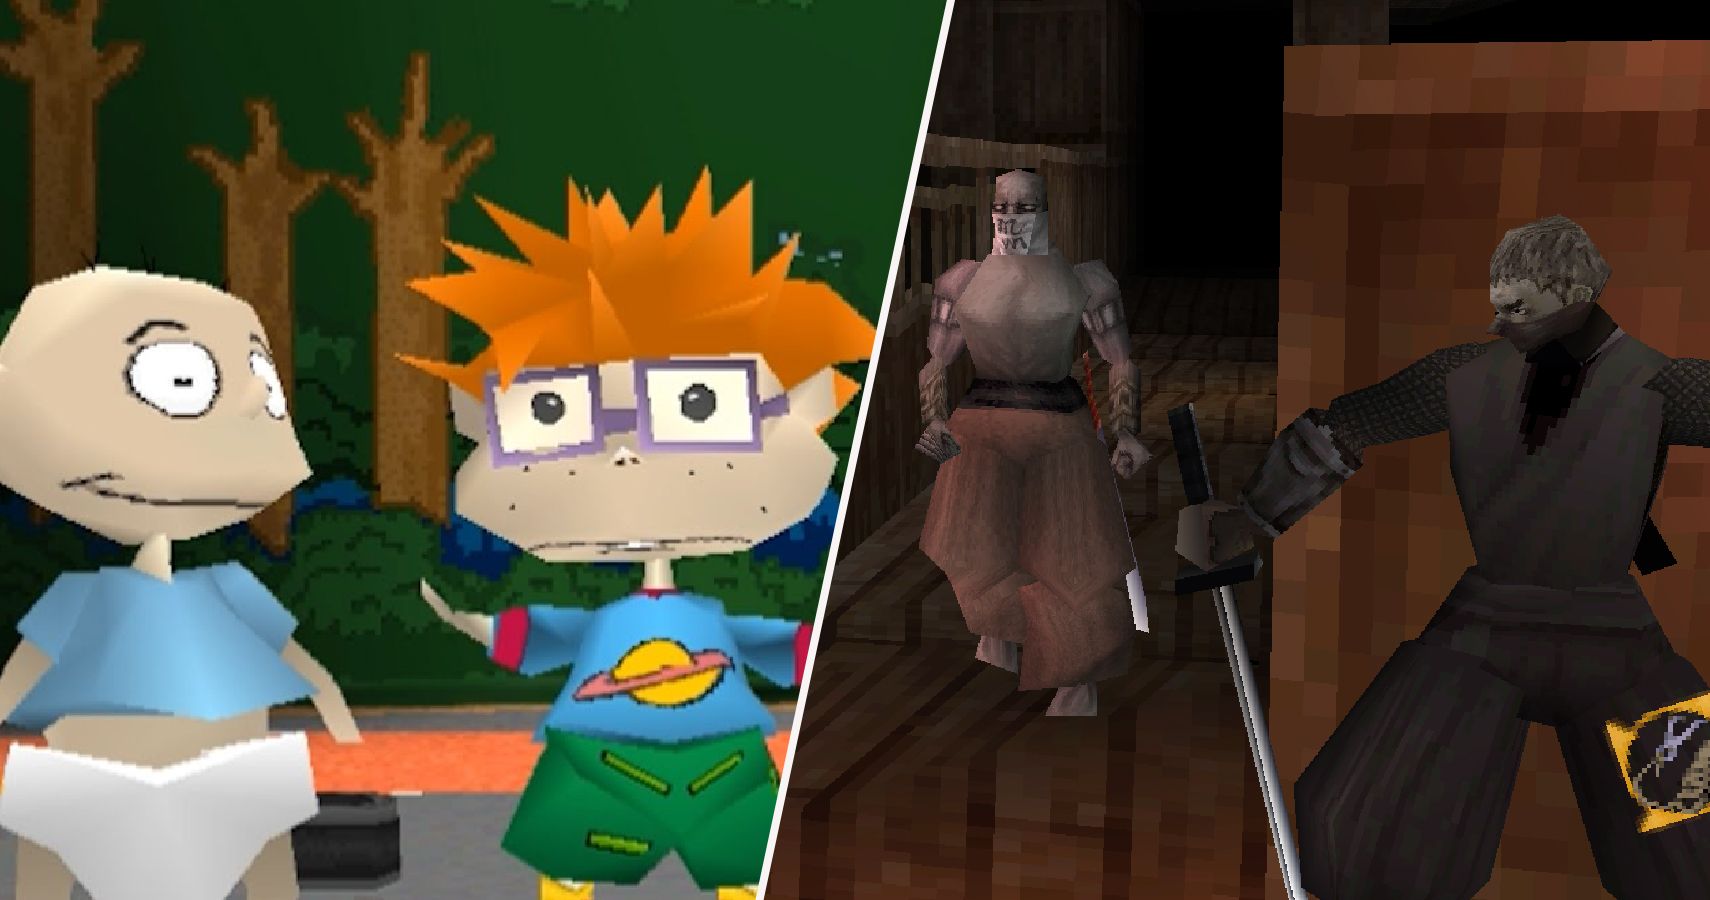 Name these old classic video games. Can you name all 15 games?